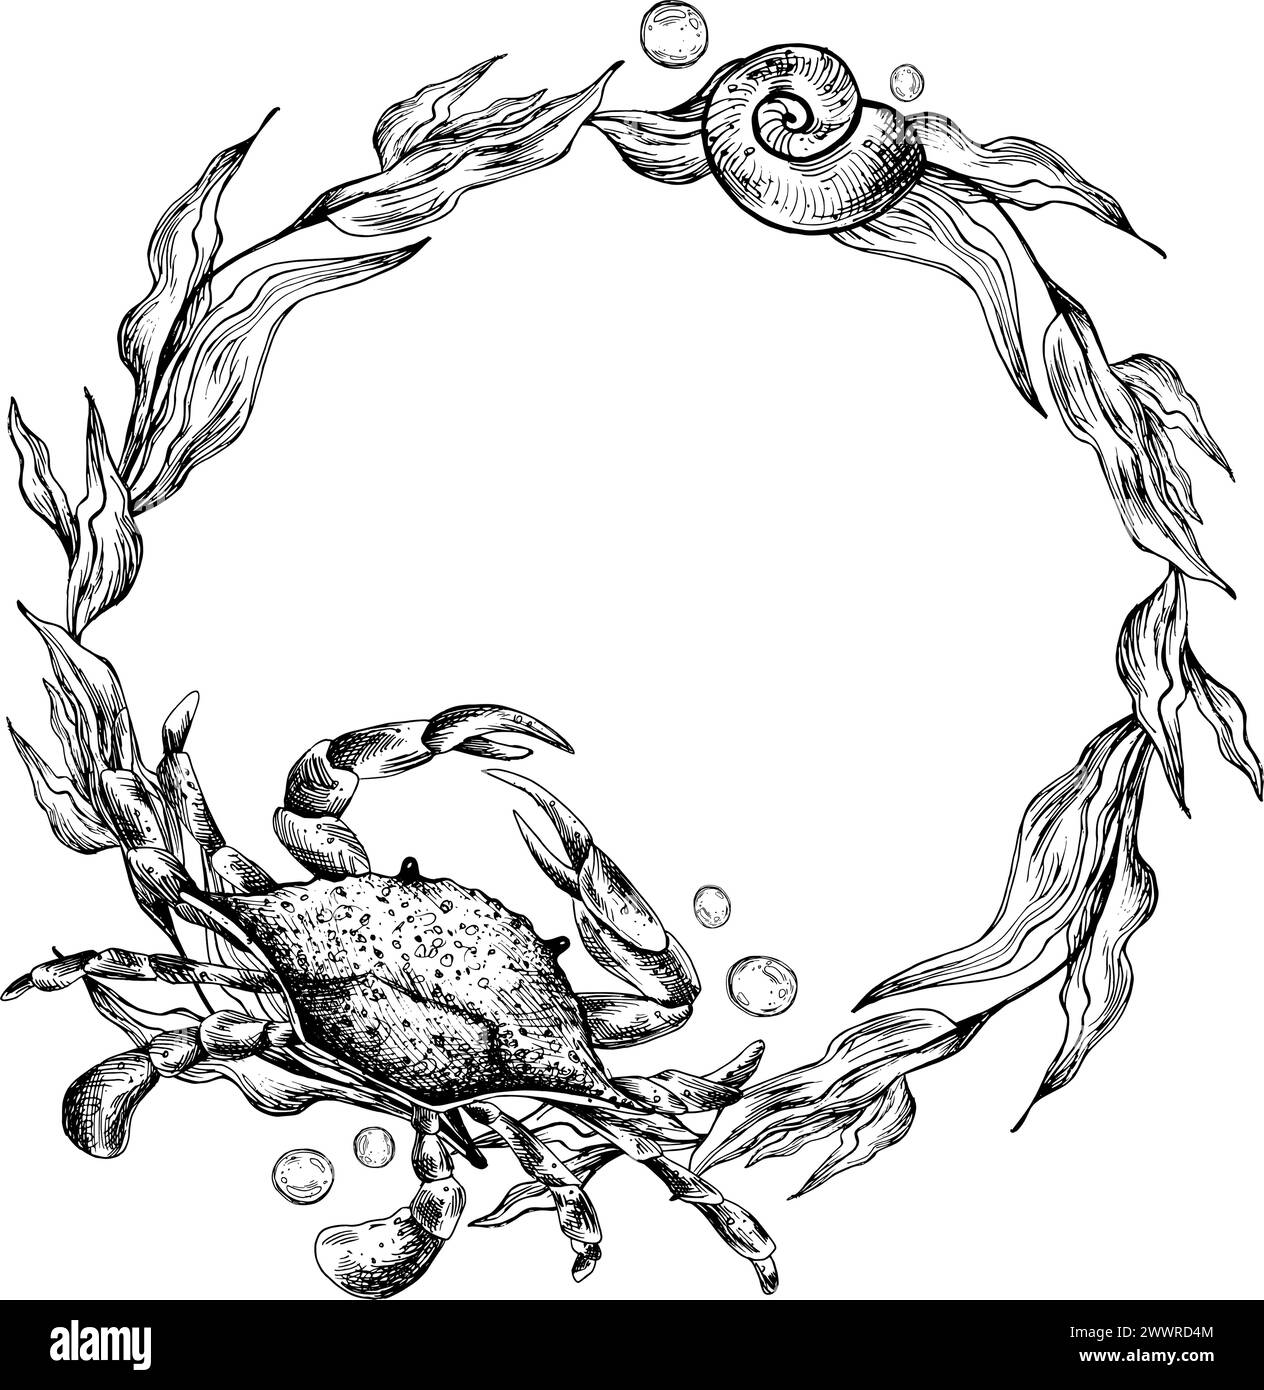 Underwater world clipart with sea animals crab, starfish and algae. Graphic illustration hand drawn in black ink. Circle wreath, frame EPS vector. Stock Vector